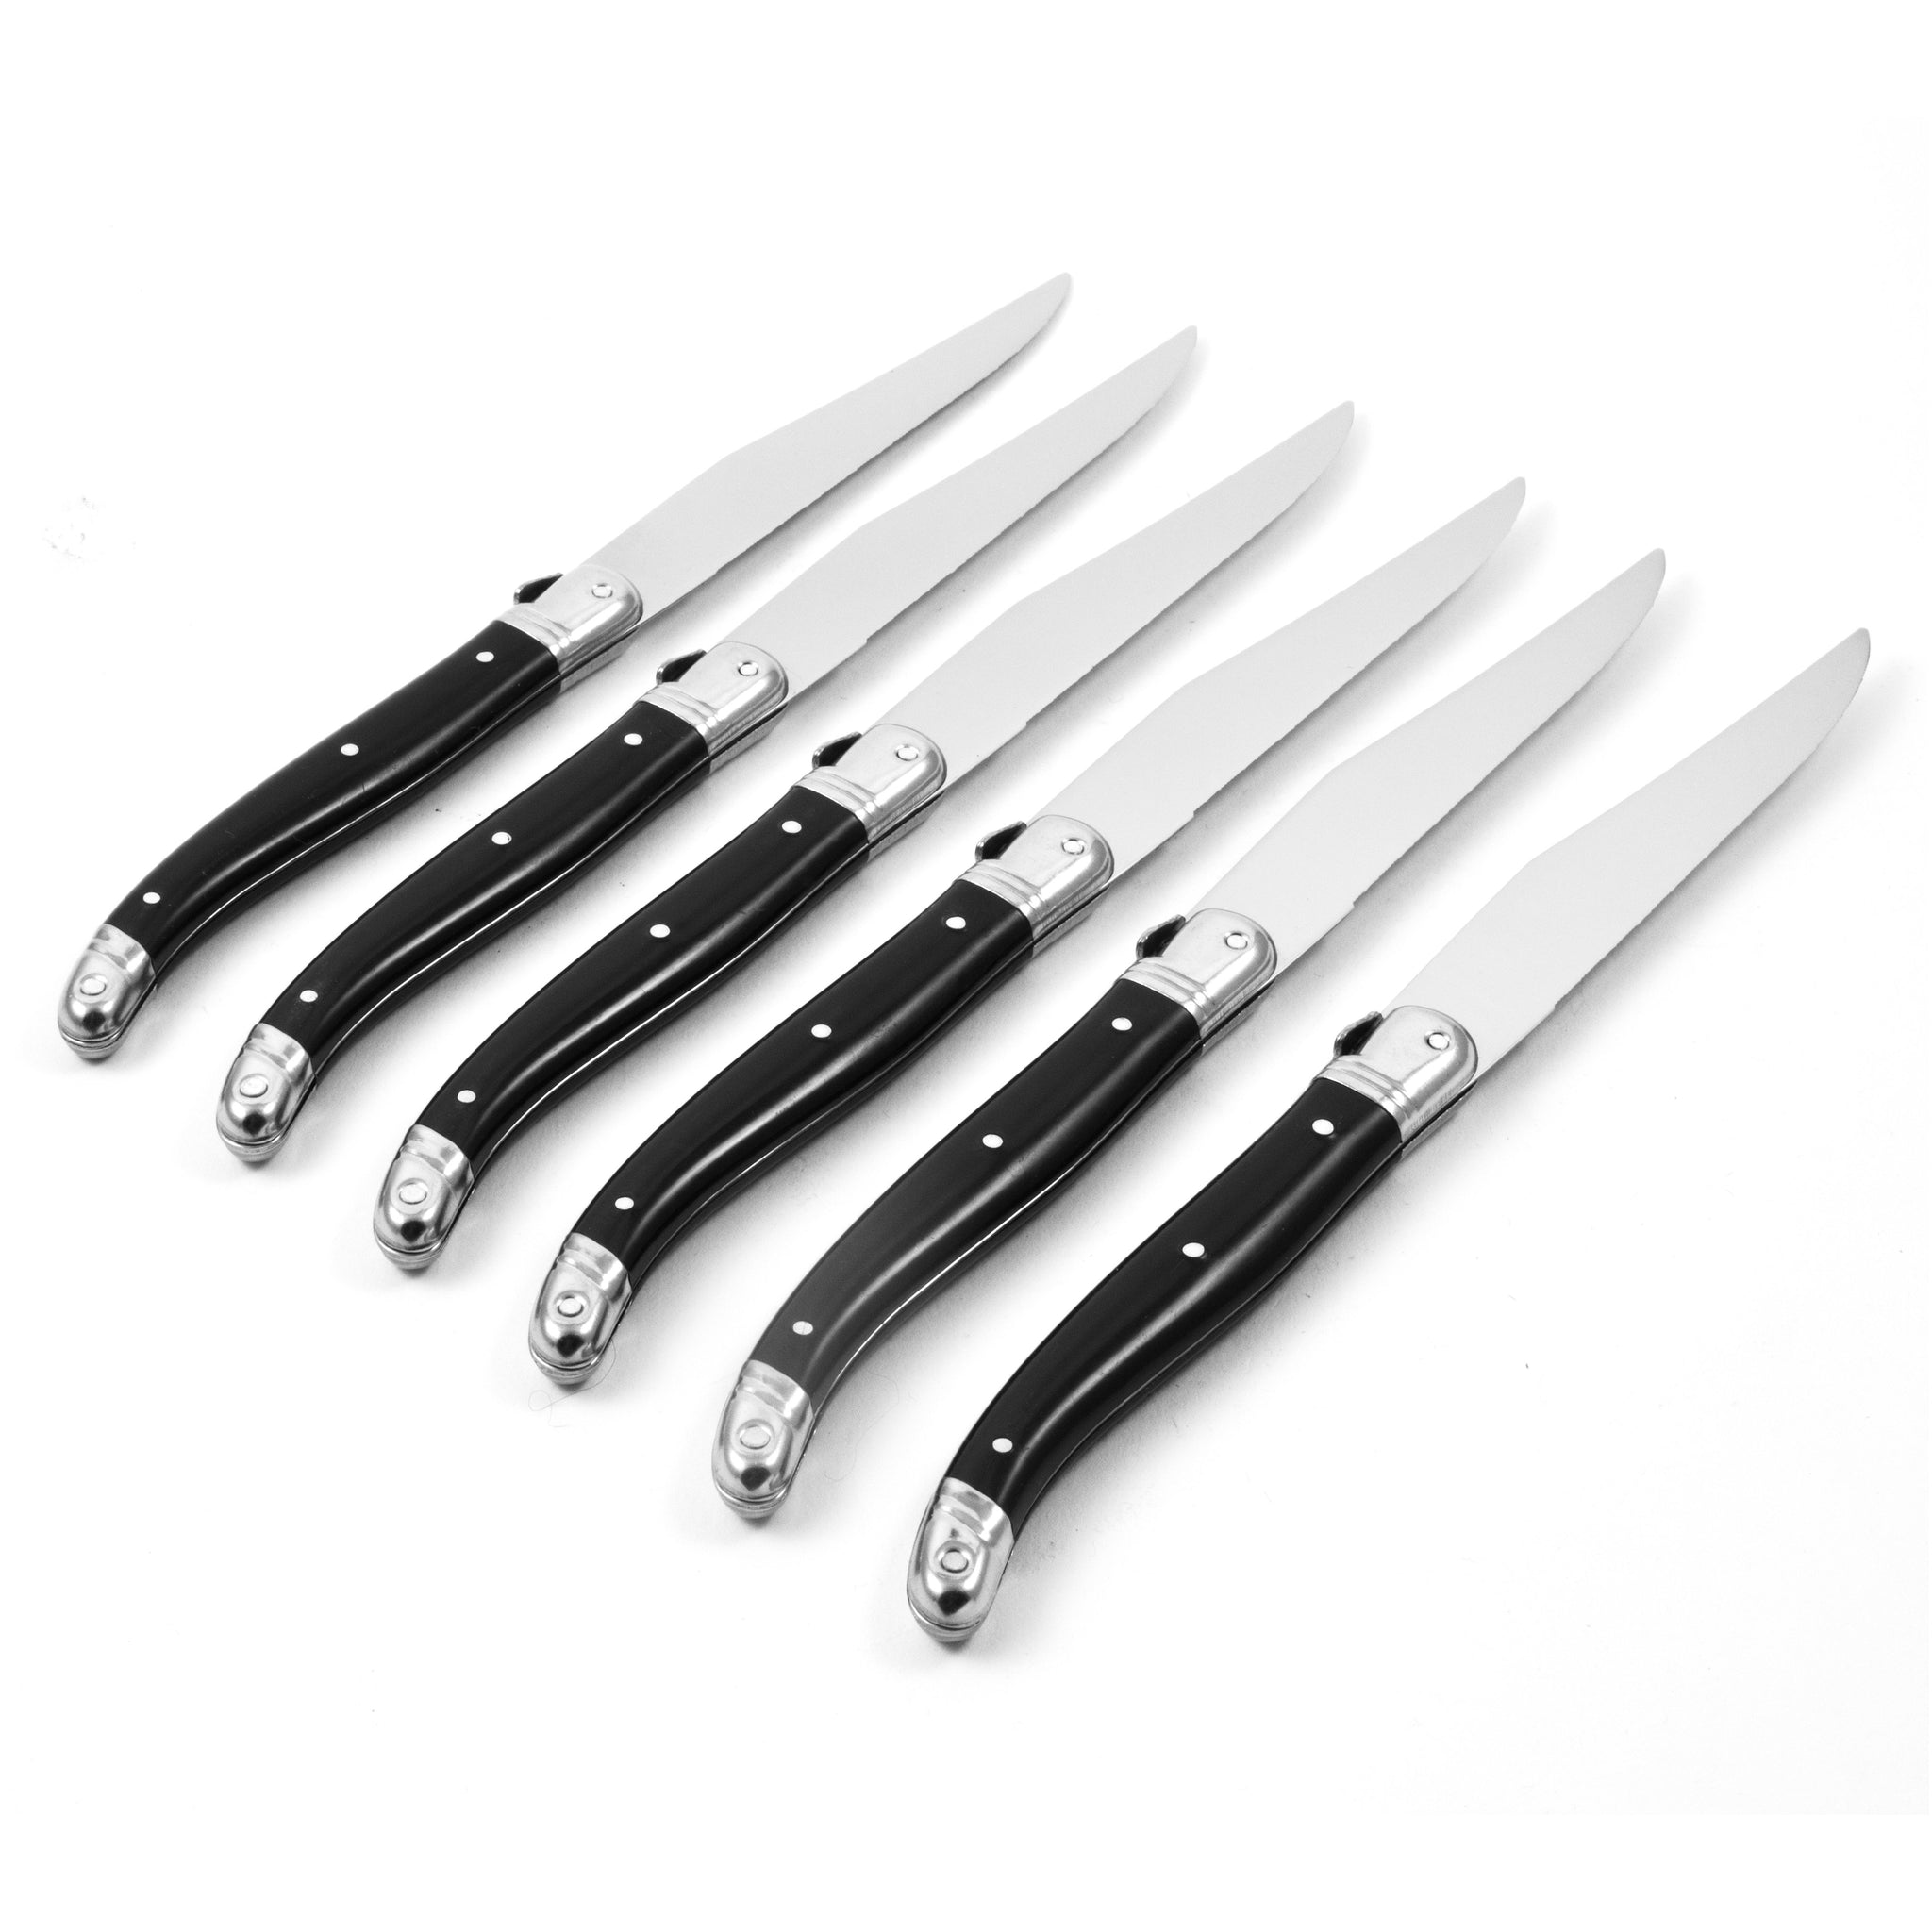 Laguiole 6 Piece Black Knife Set in Wooden Box - French Dry Goods